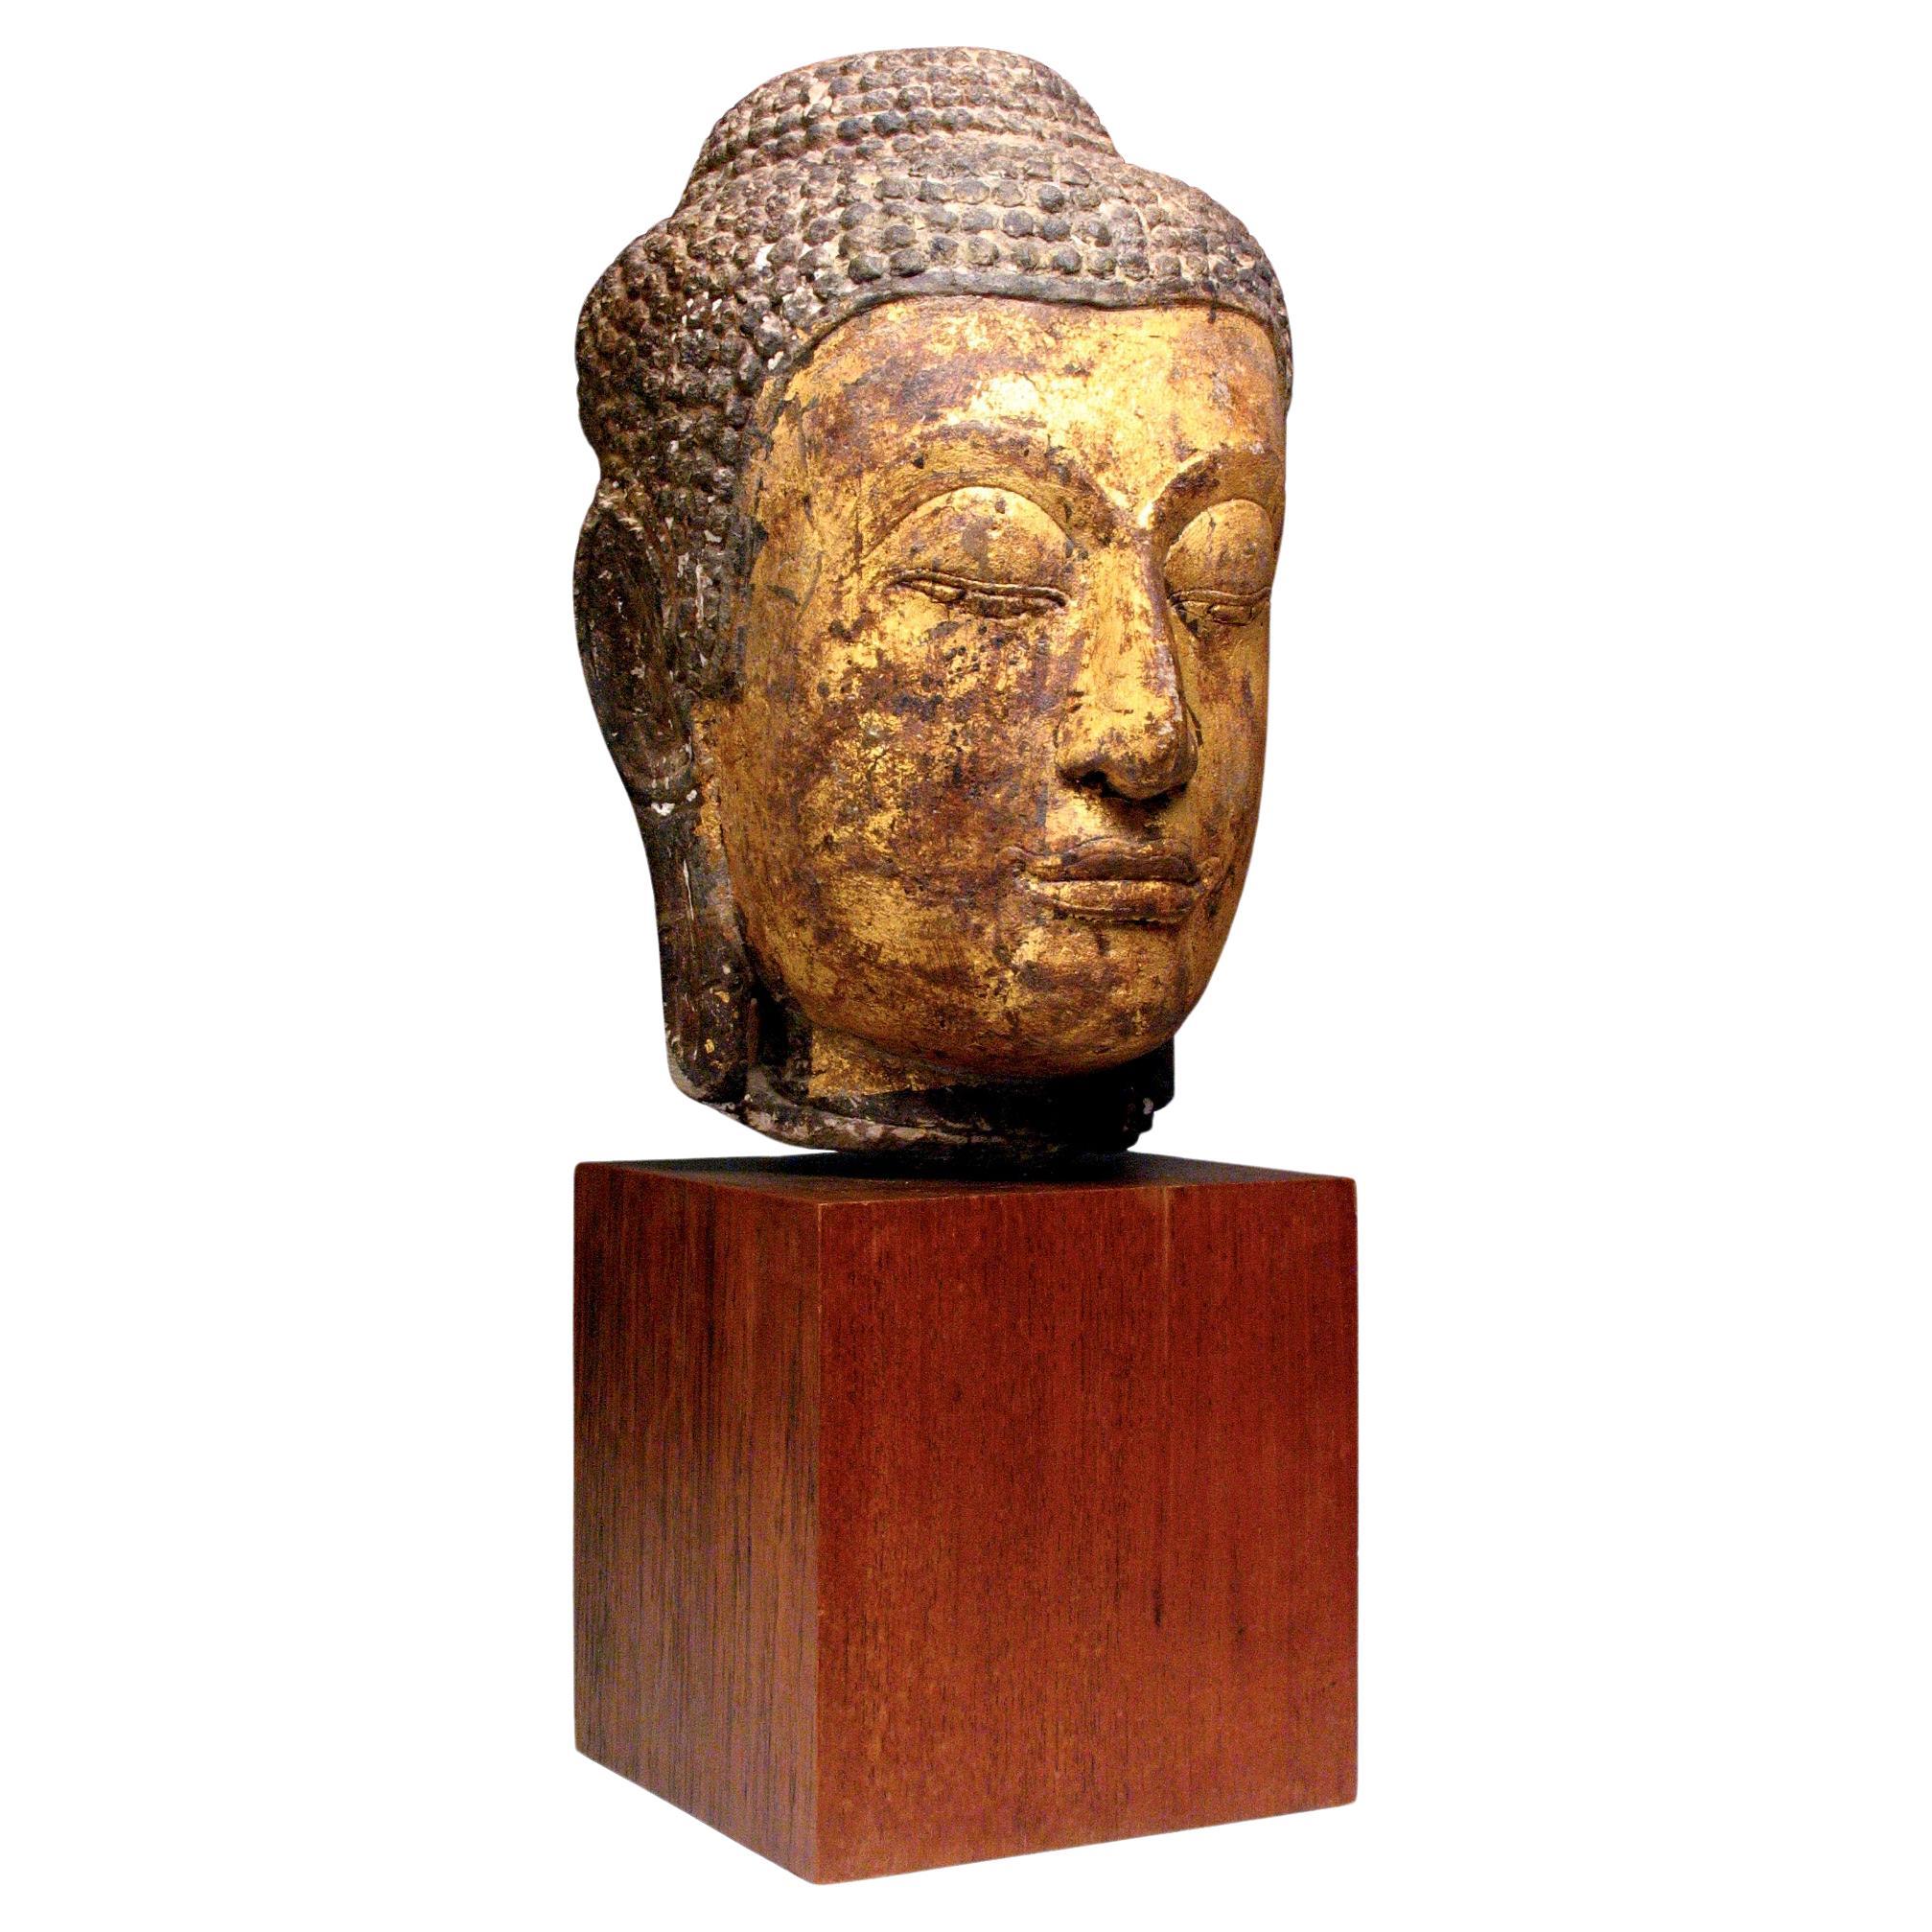 Thai Sandstone Carving of the Head of A Buddha Image